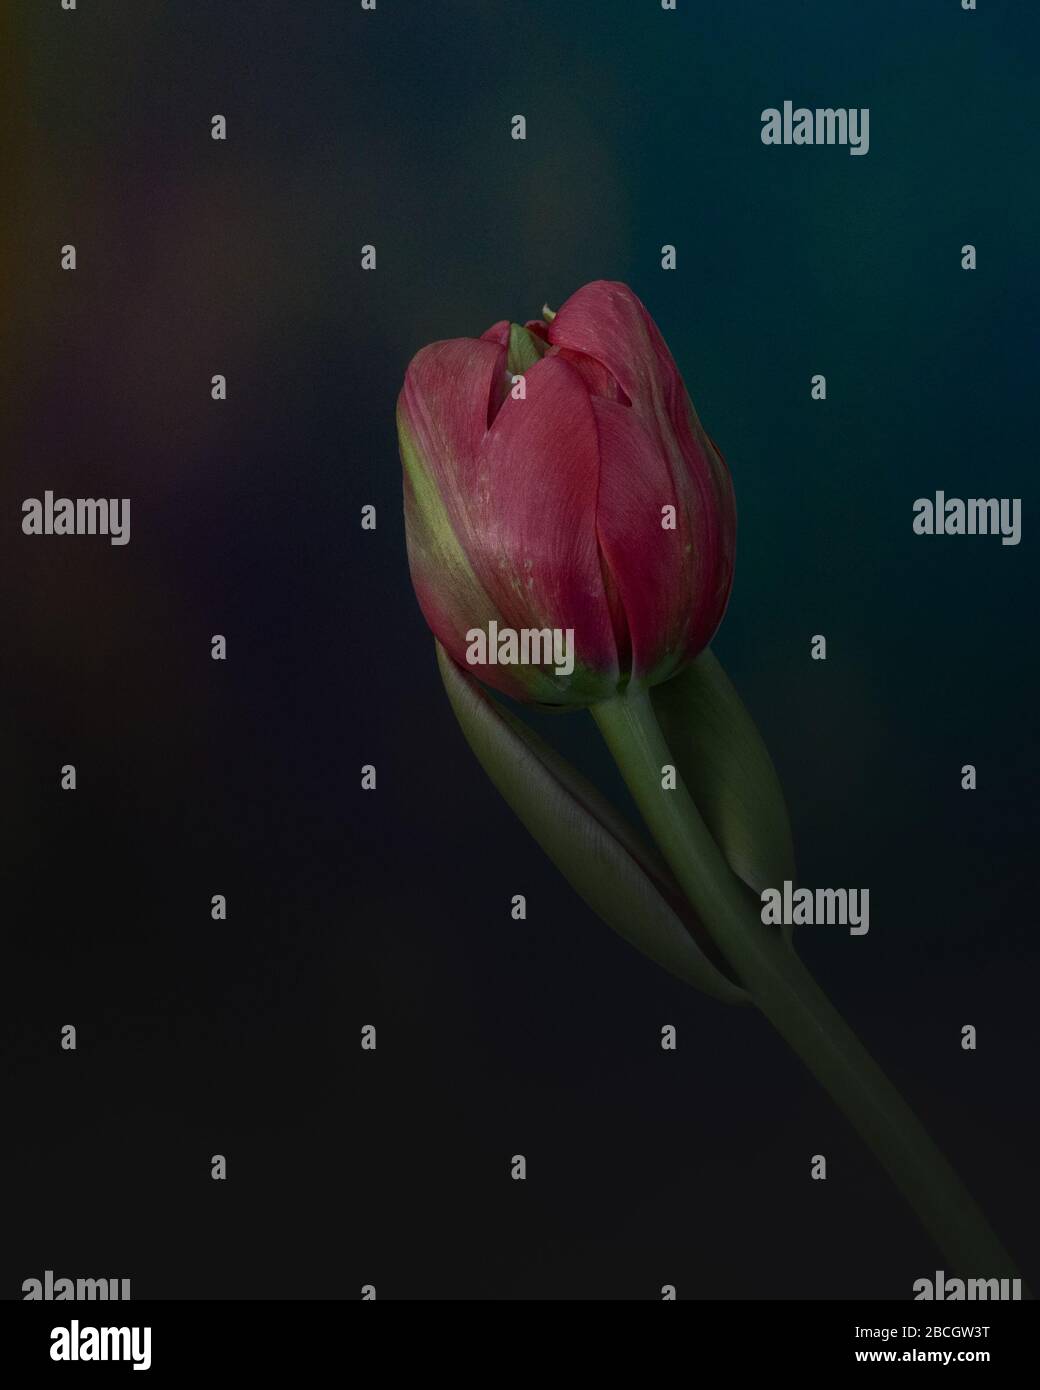 Tulips commonly mean perfect love, owing to Turkish and Persian legends  about the love between Farhad and Shirin. In one version of the story,  Farhad Stock Photo - Alamy